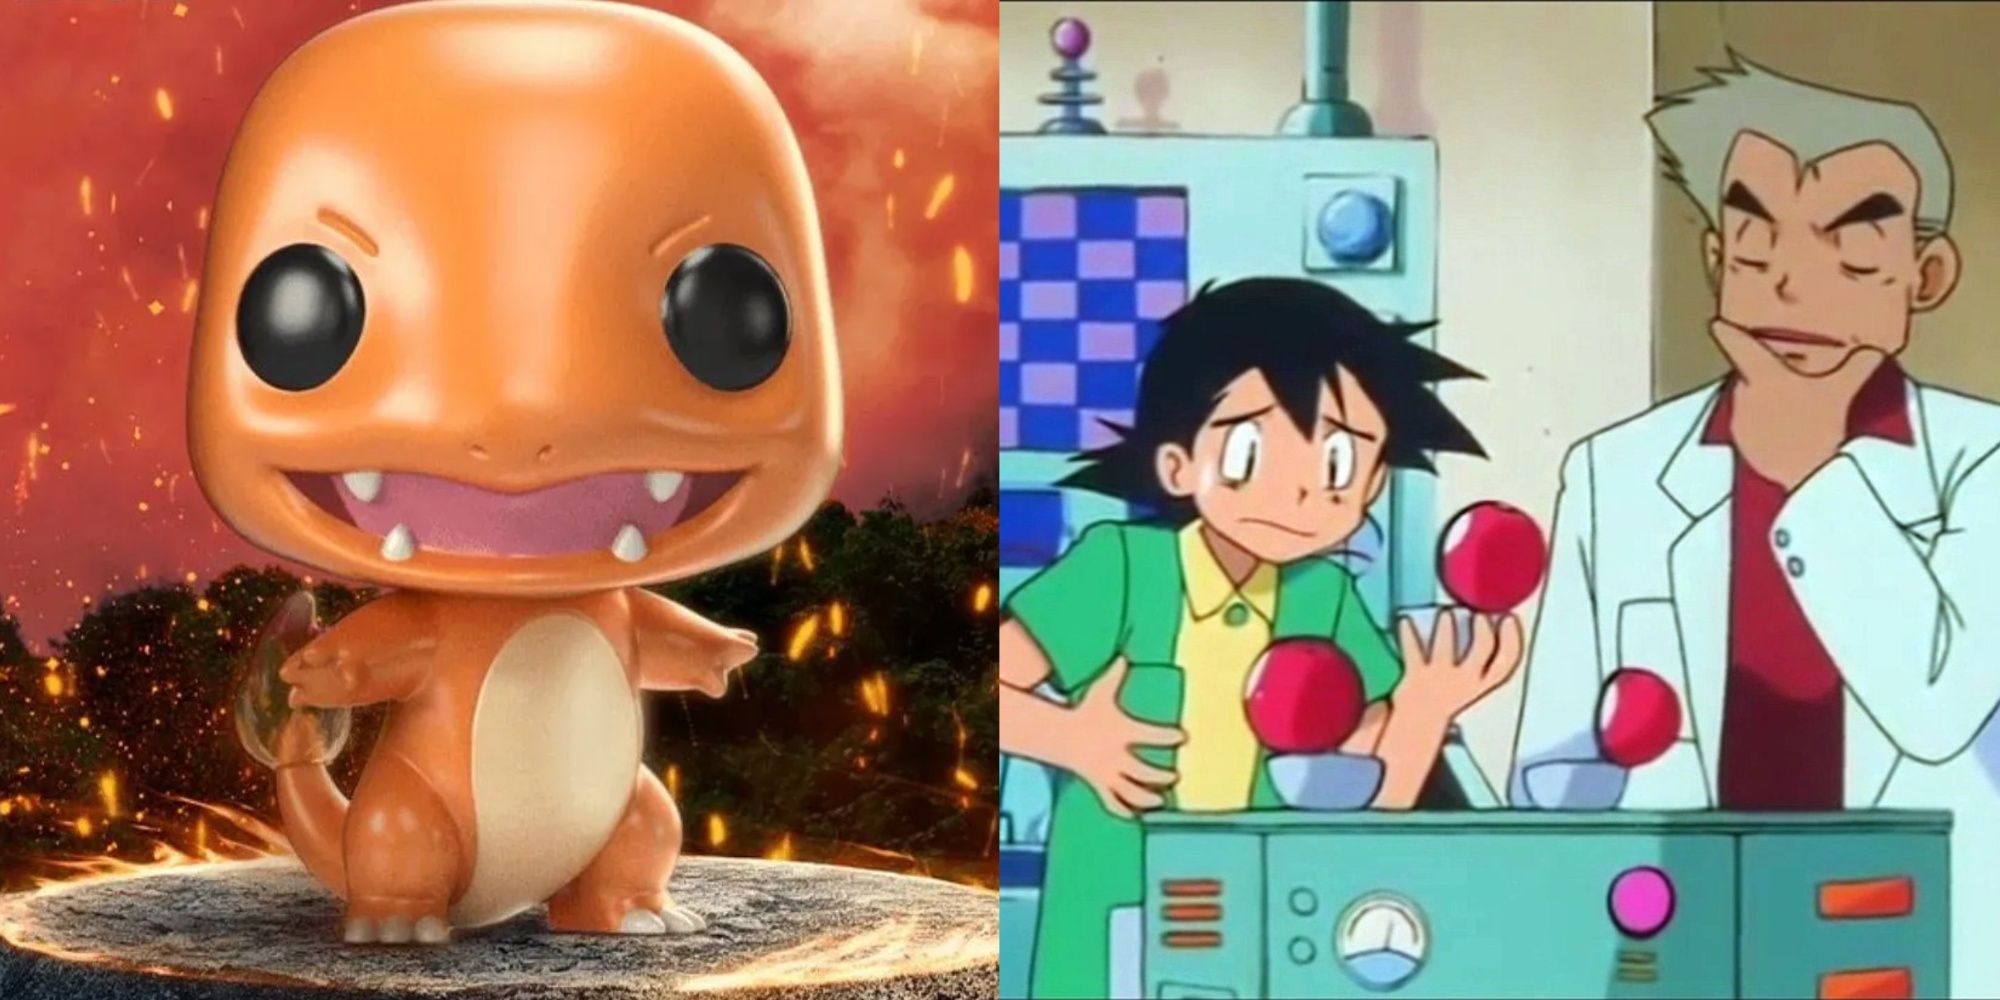 charmander funko pop, and ask trying to choose his starter pokemon